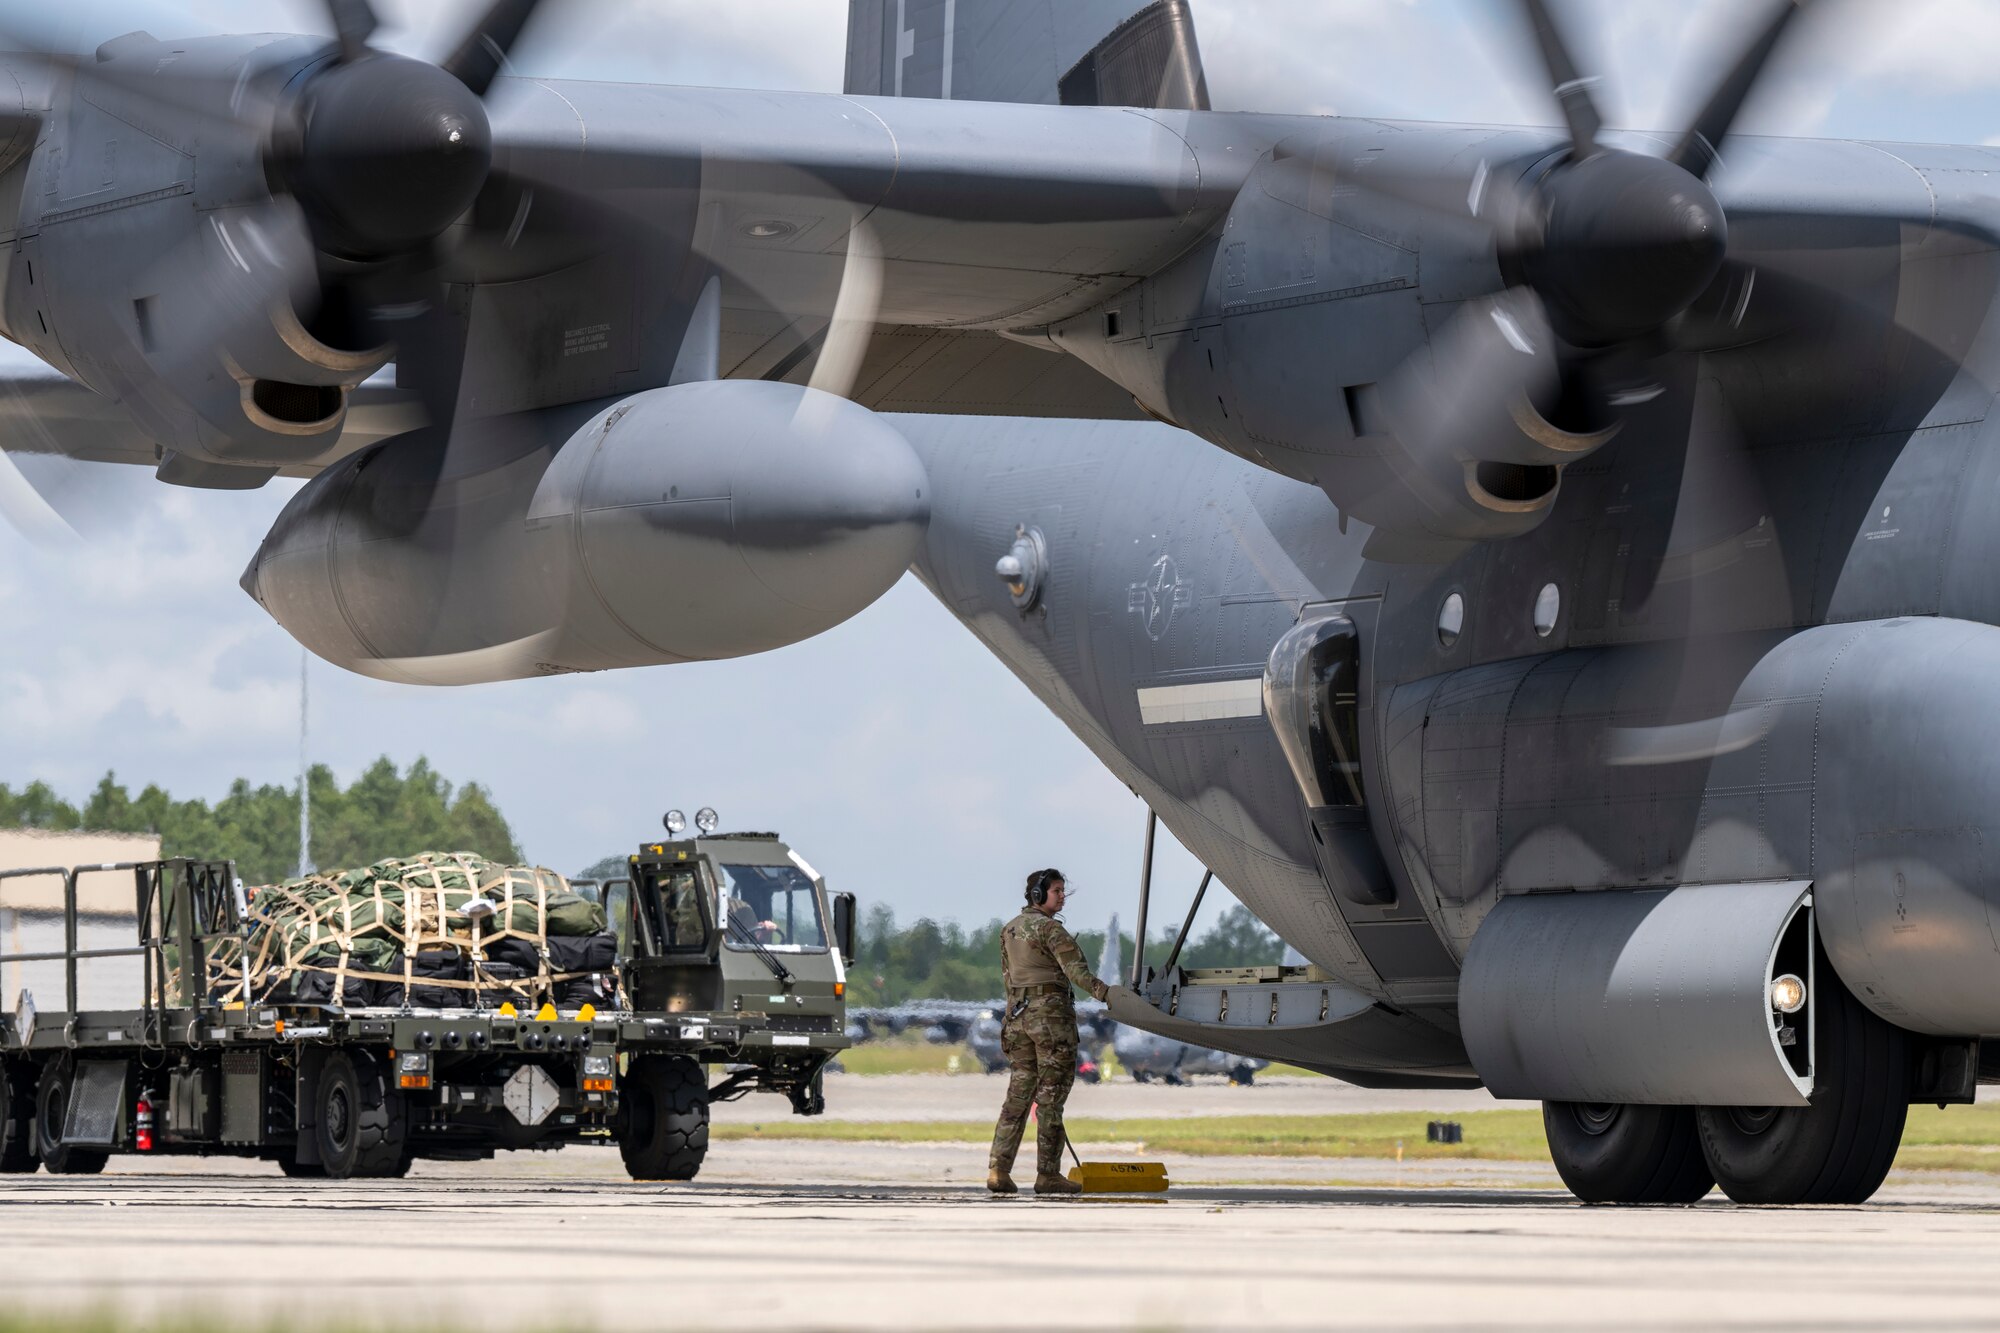 A U.S. Air Force loadmaster assigned to the 71st Rescue Squadron prepares to load cargo onto an HC-130J Combat King II during Exercise Ready Tiger 24-1 from Moody Air Force Base, Georgia, April 10, 2024. A loadmaster's duties include mathematically preplanning the correct placement of the load on the airplane, providing passenger comfort and safety, securing cargo and taking part in airdrop operations. Ready Tiger 24-1 is a readiness exercise demonstrating the 23rd Wing’s ability to plan, prepare and execute operations and maintenance to project air power in contested and dispersed locations, defending the United States’ interests and allies. (U.S. Air Force photo by Senior Airman Deanna Muir)